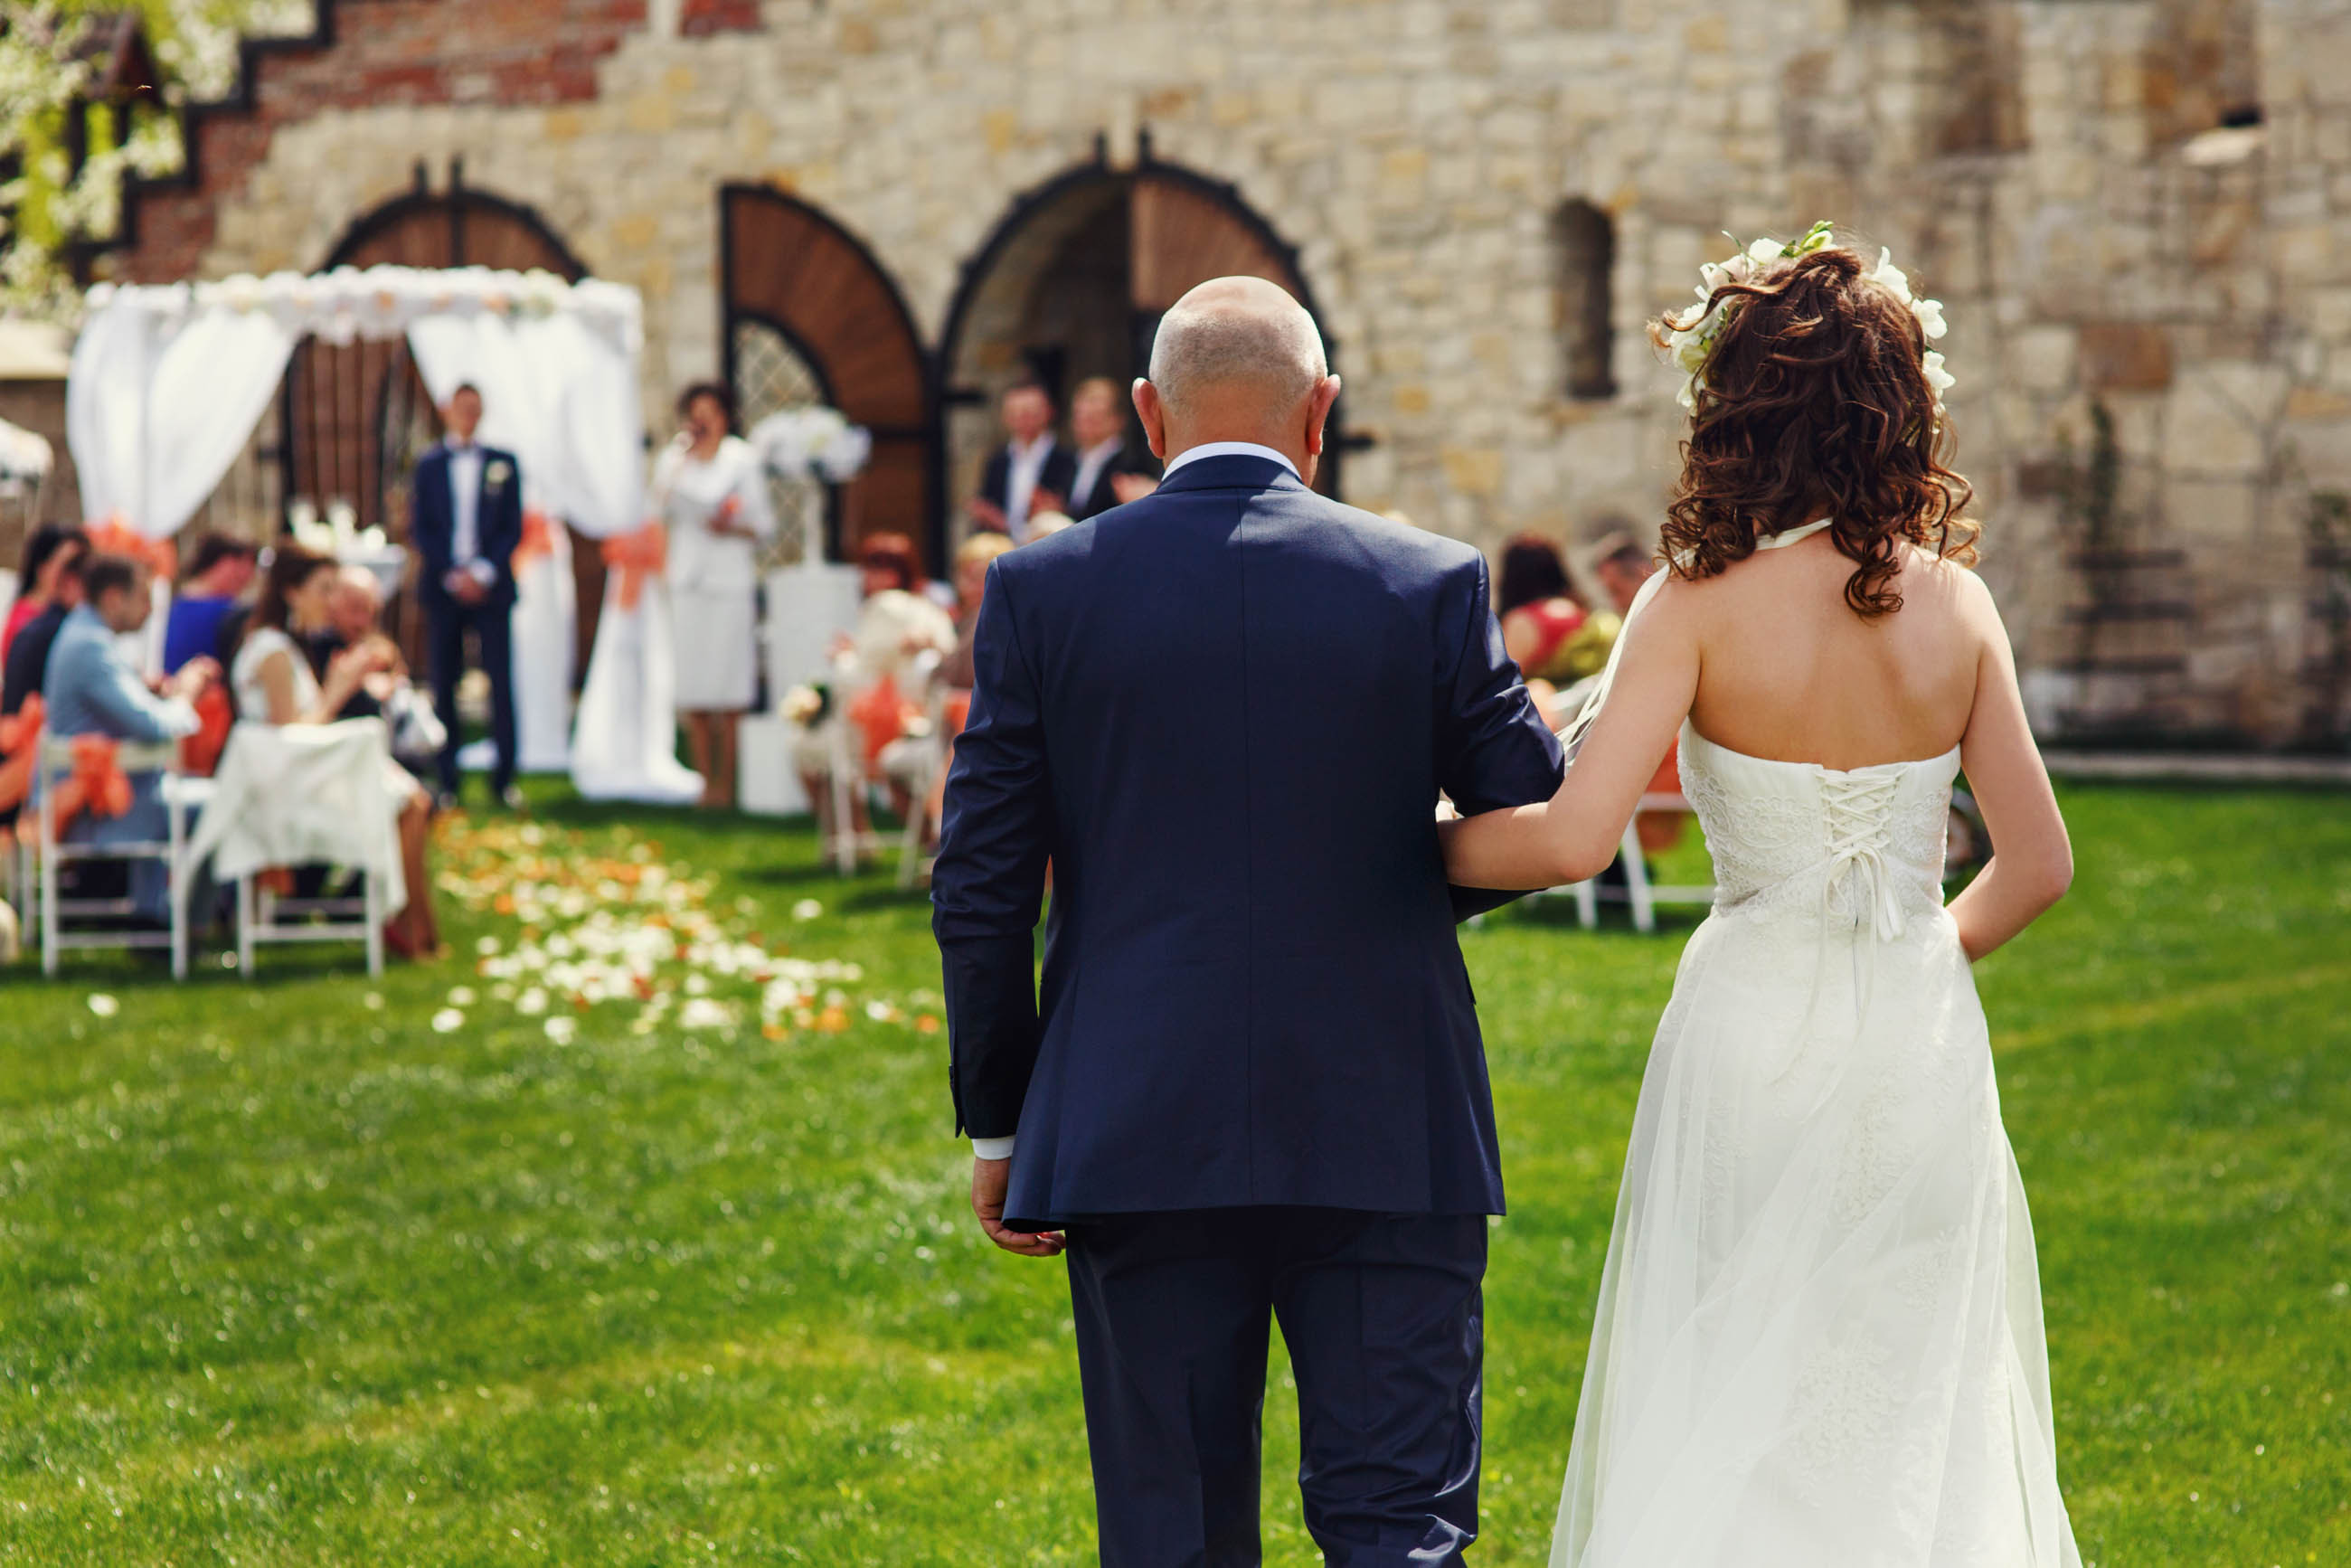 A bride walks down the aisle with her father. | Source: Shutterstock